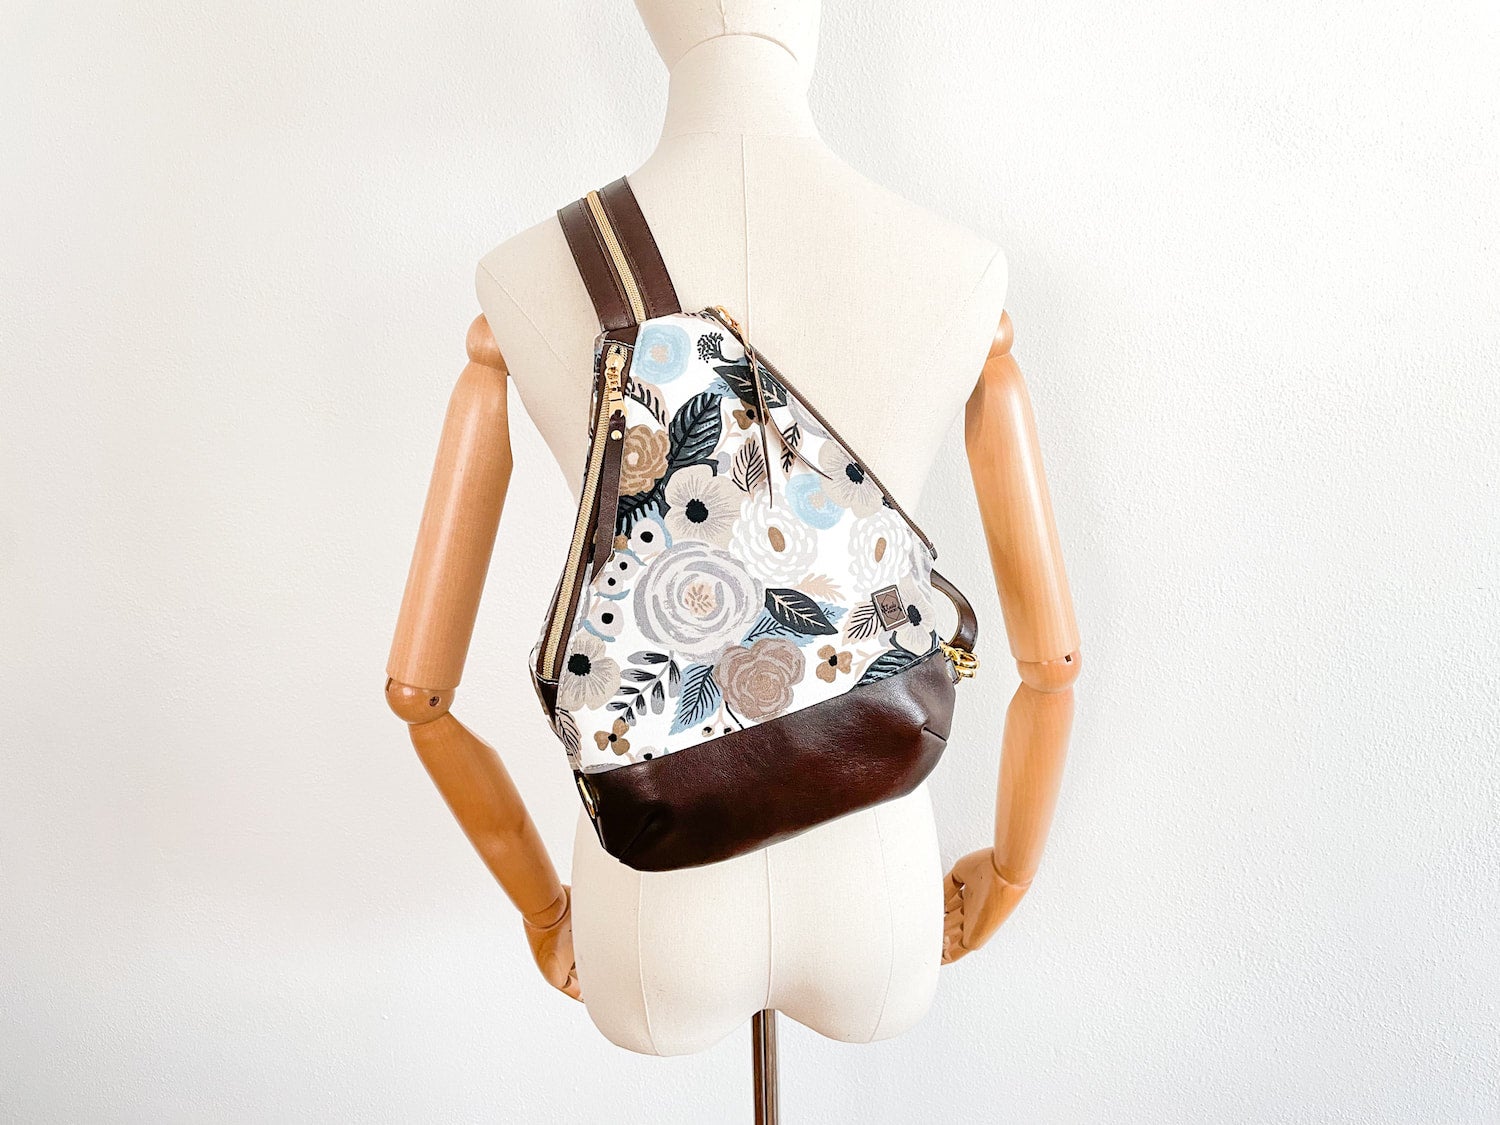 Charlie Convertible Backpack Sewing Pattern